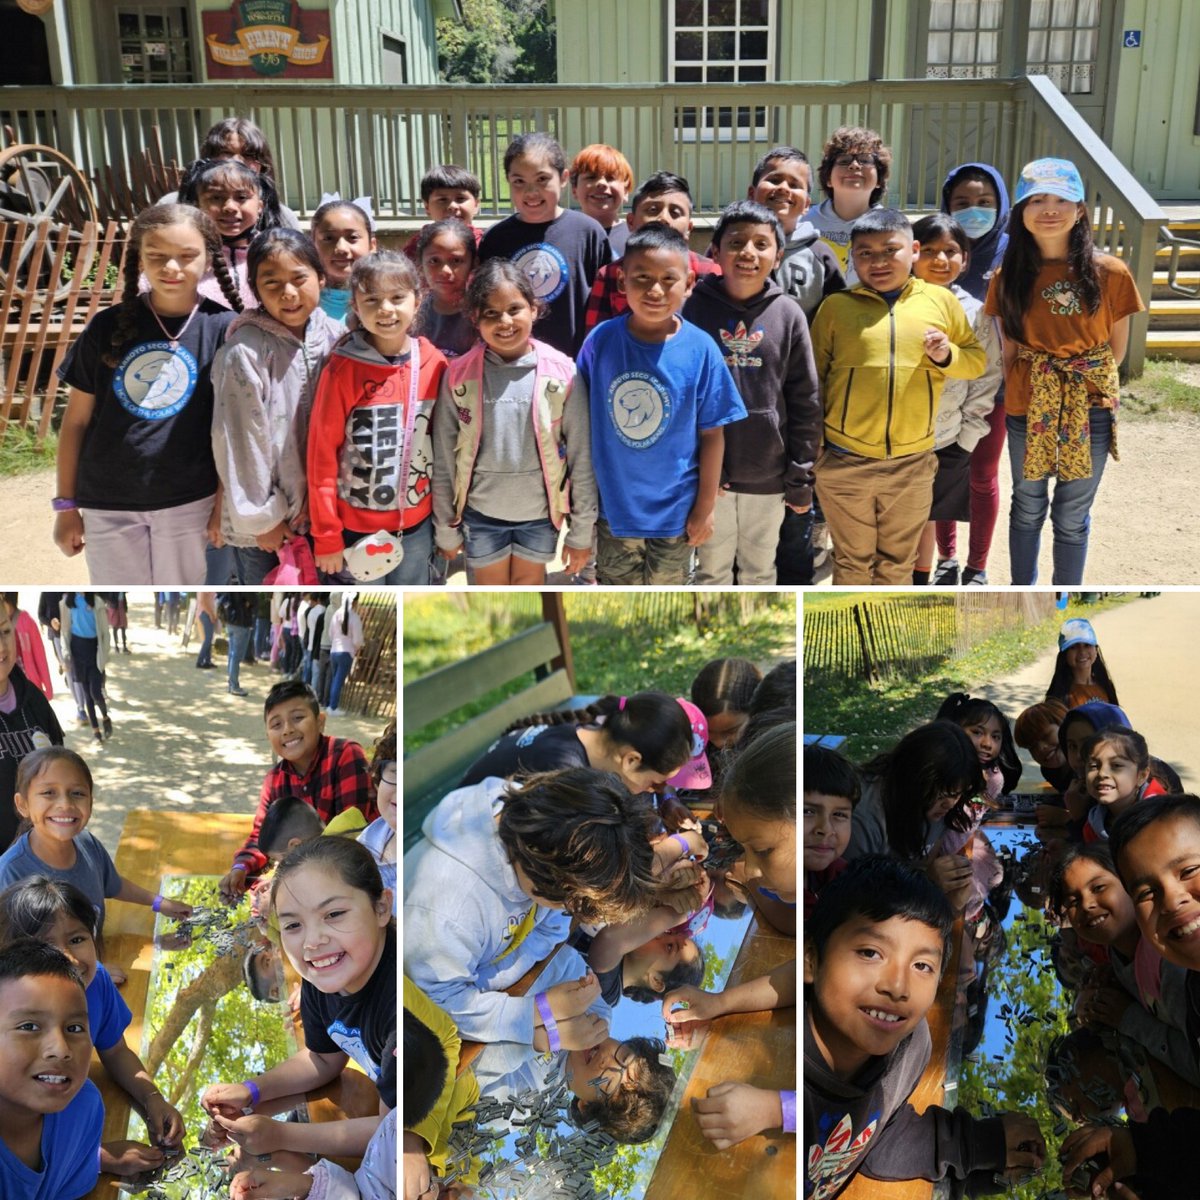 3rd graders had an absolute blast today exploring the majestic redwoods at Roaring Camp! 🌲🌞🐾💙
#ASA #PolarBearPride #GUSD #AllMeansAll